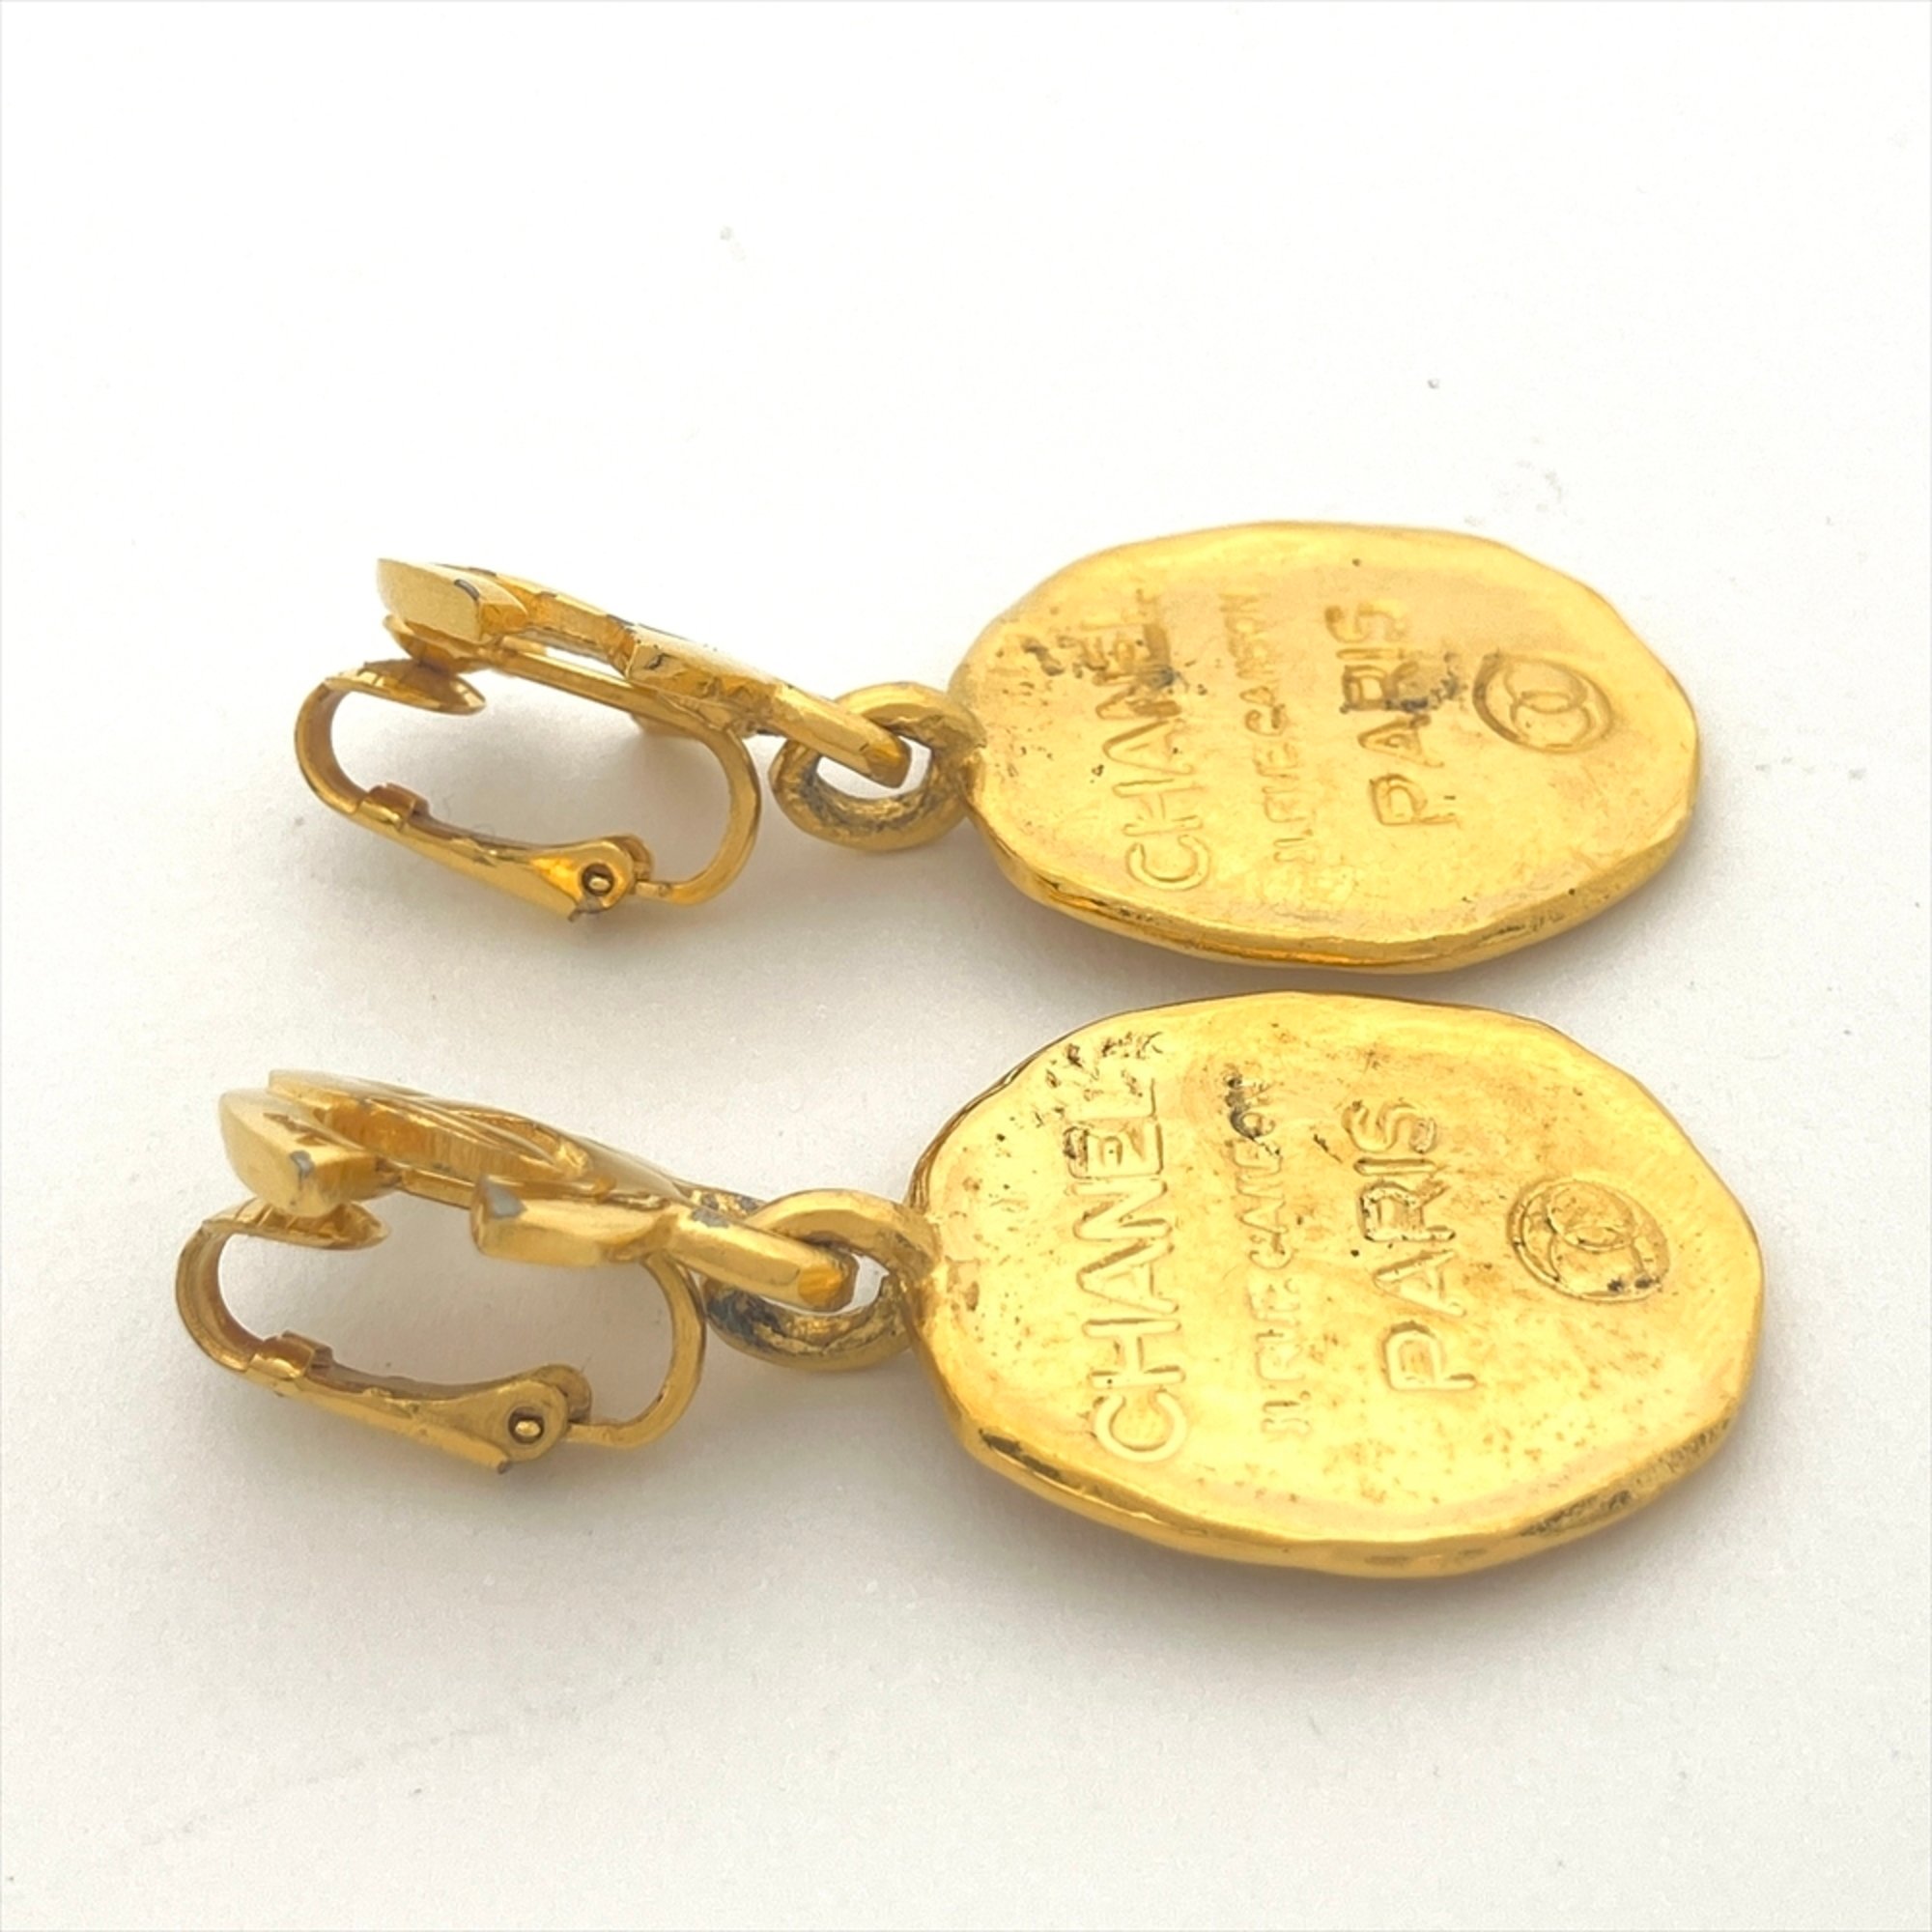 CHANEL Coco Mark Cambon Plate Earrings GP Gold IT6B6449IF6V